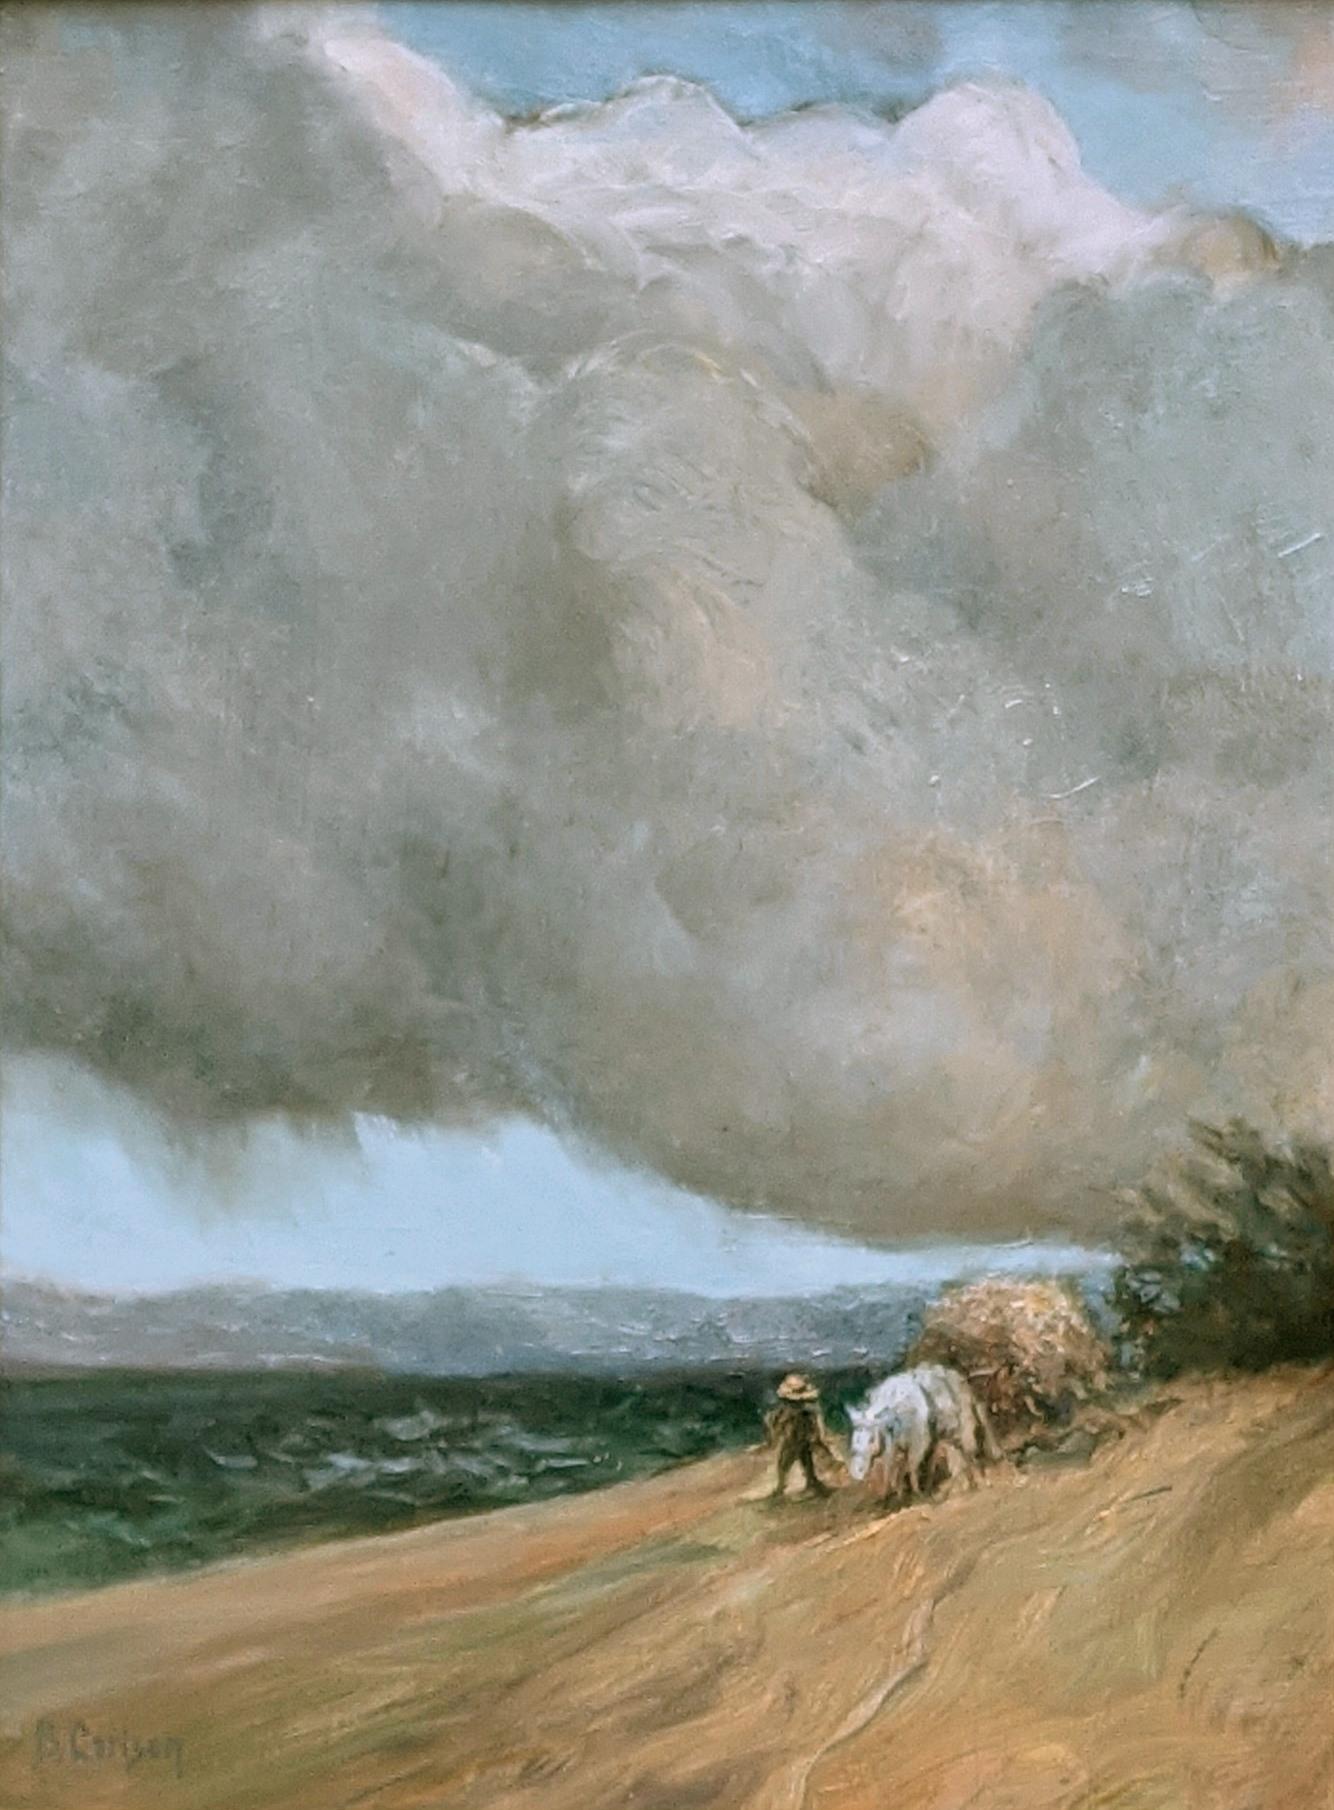 Beth Carlson Landscape Painting -  Dramatic Landscape with Foreboding Clouds Threaten A Weary 19th C. Farmer